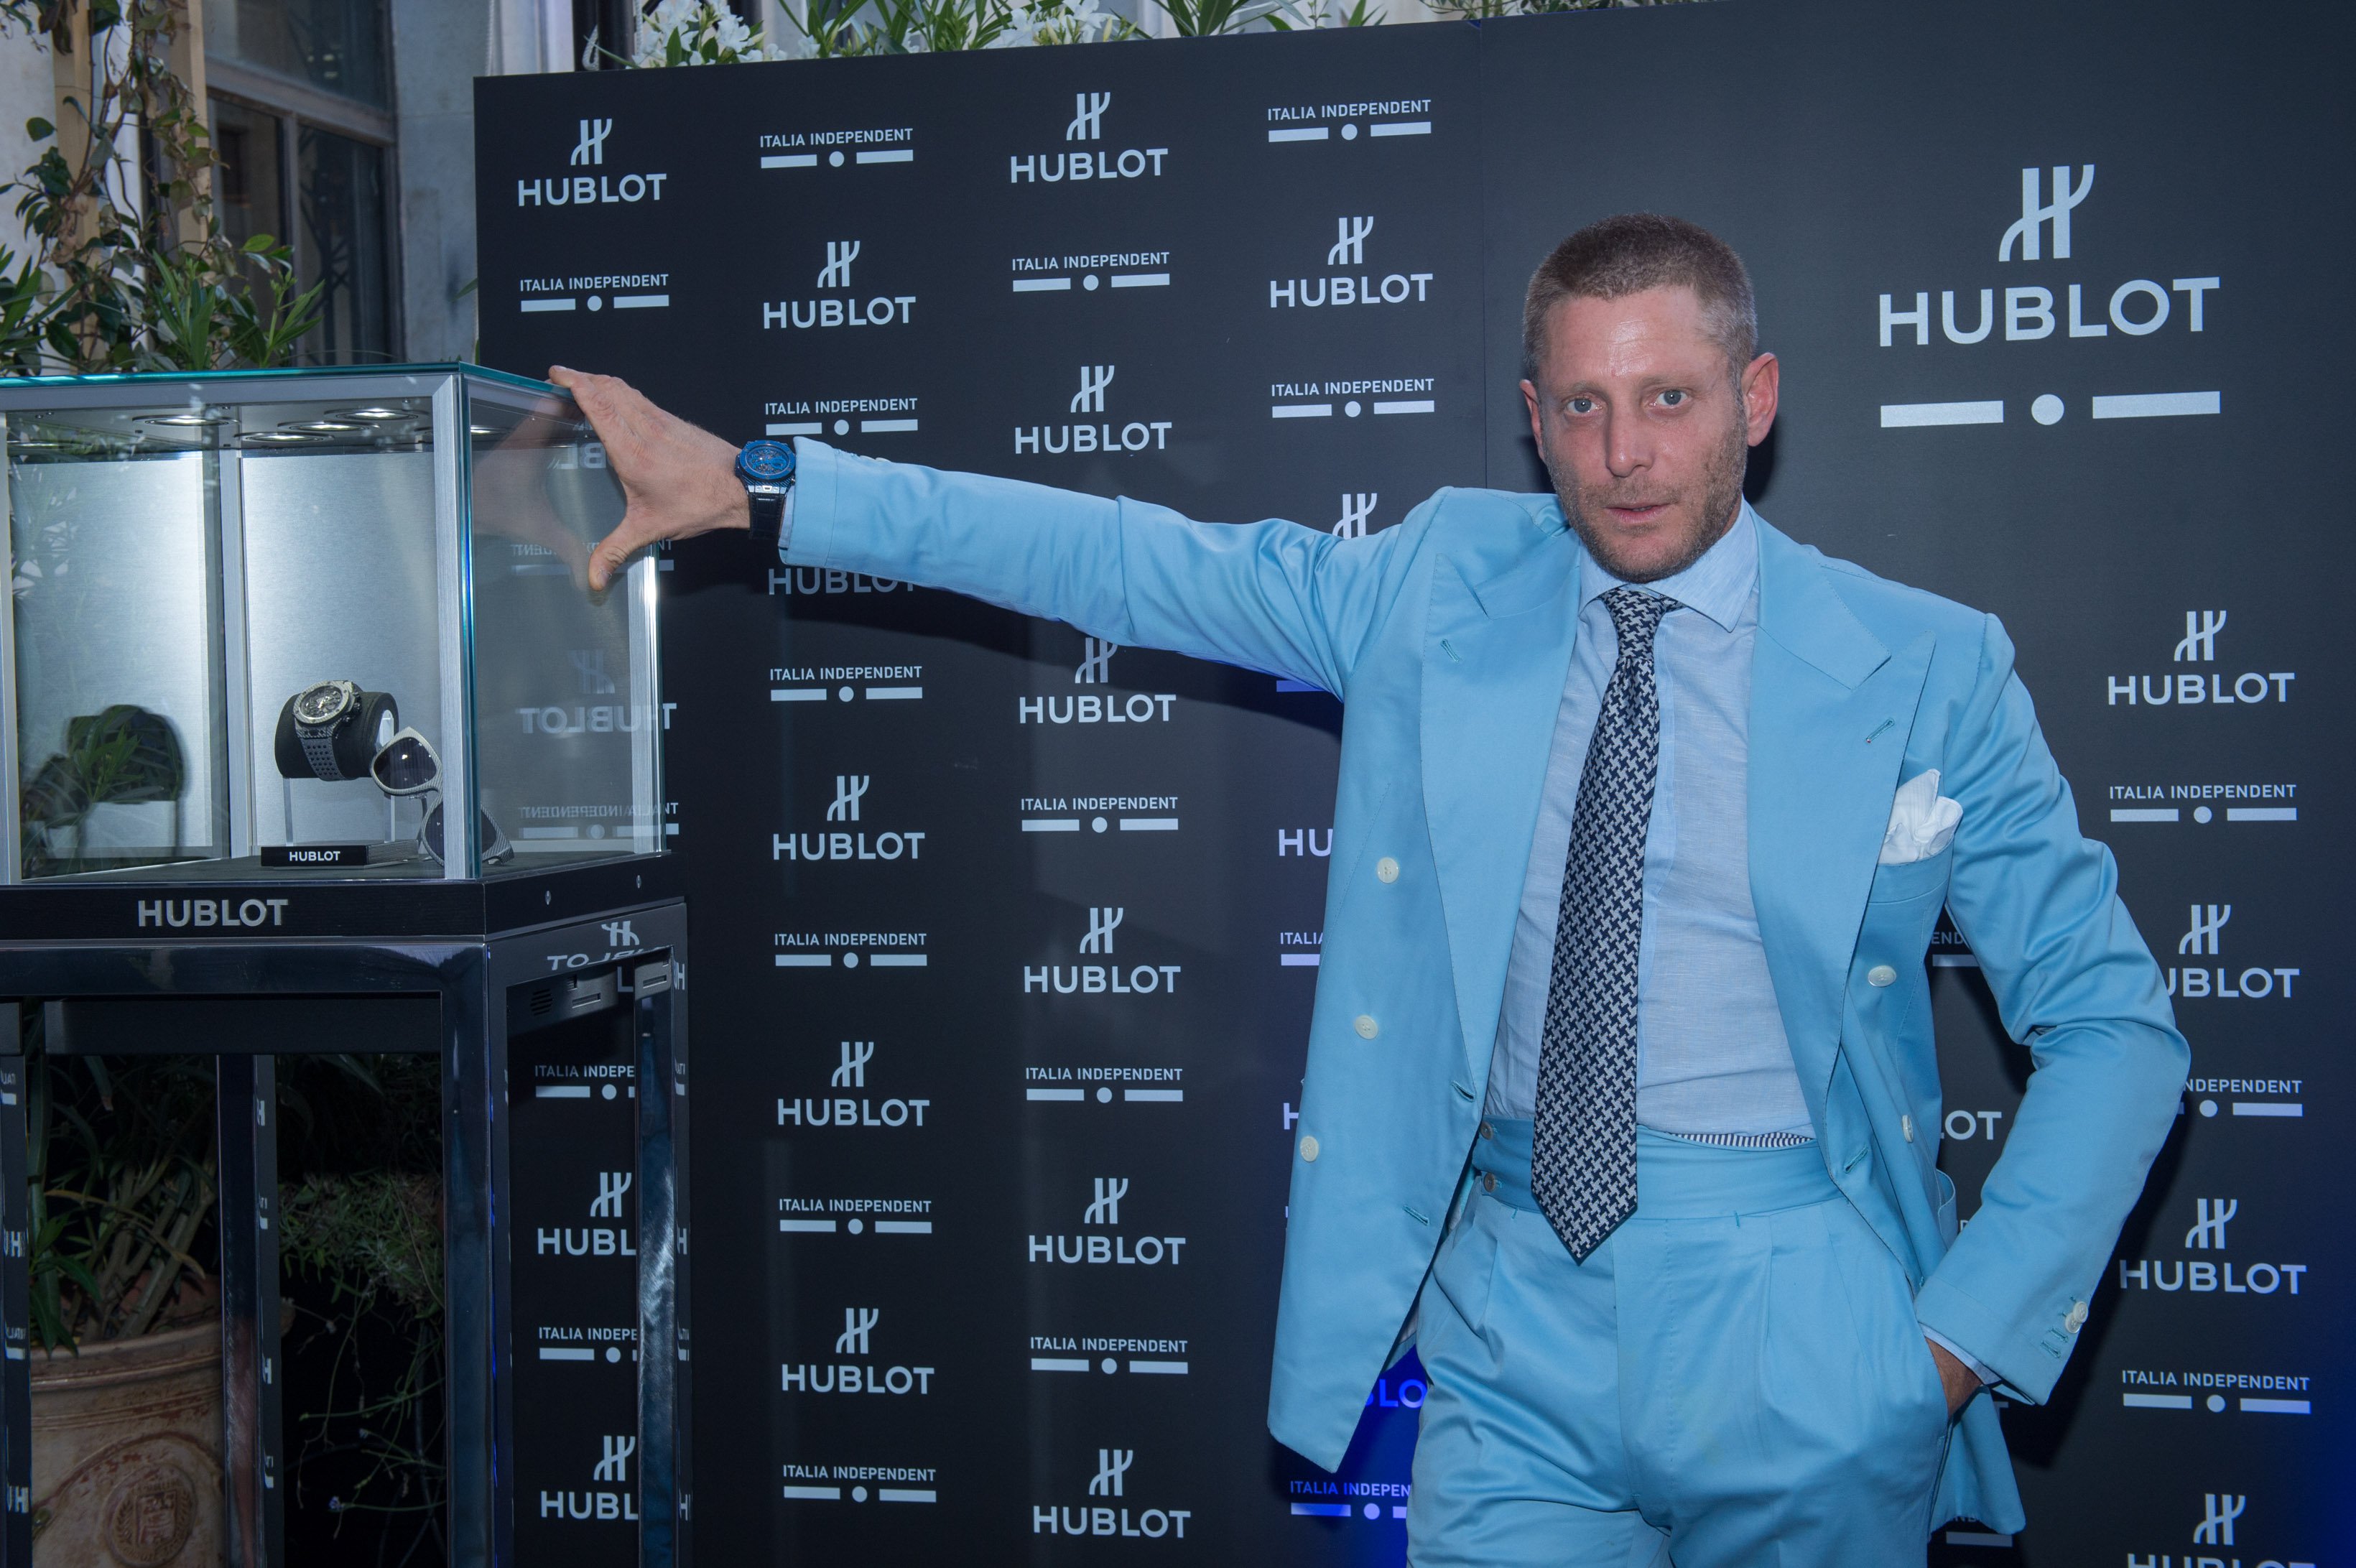 Paris Brings Together Two Style Giants With The Launch Of The Hublot Big Bang Unico Italia Independent